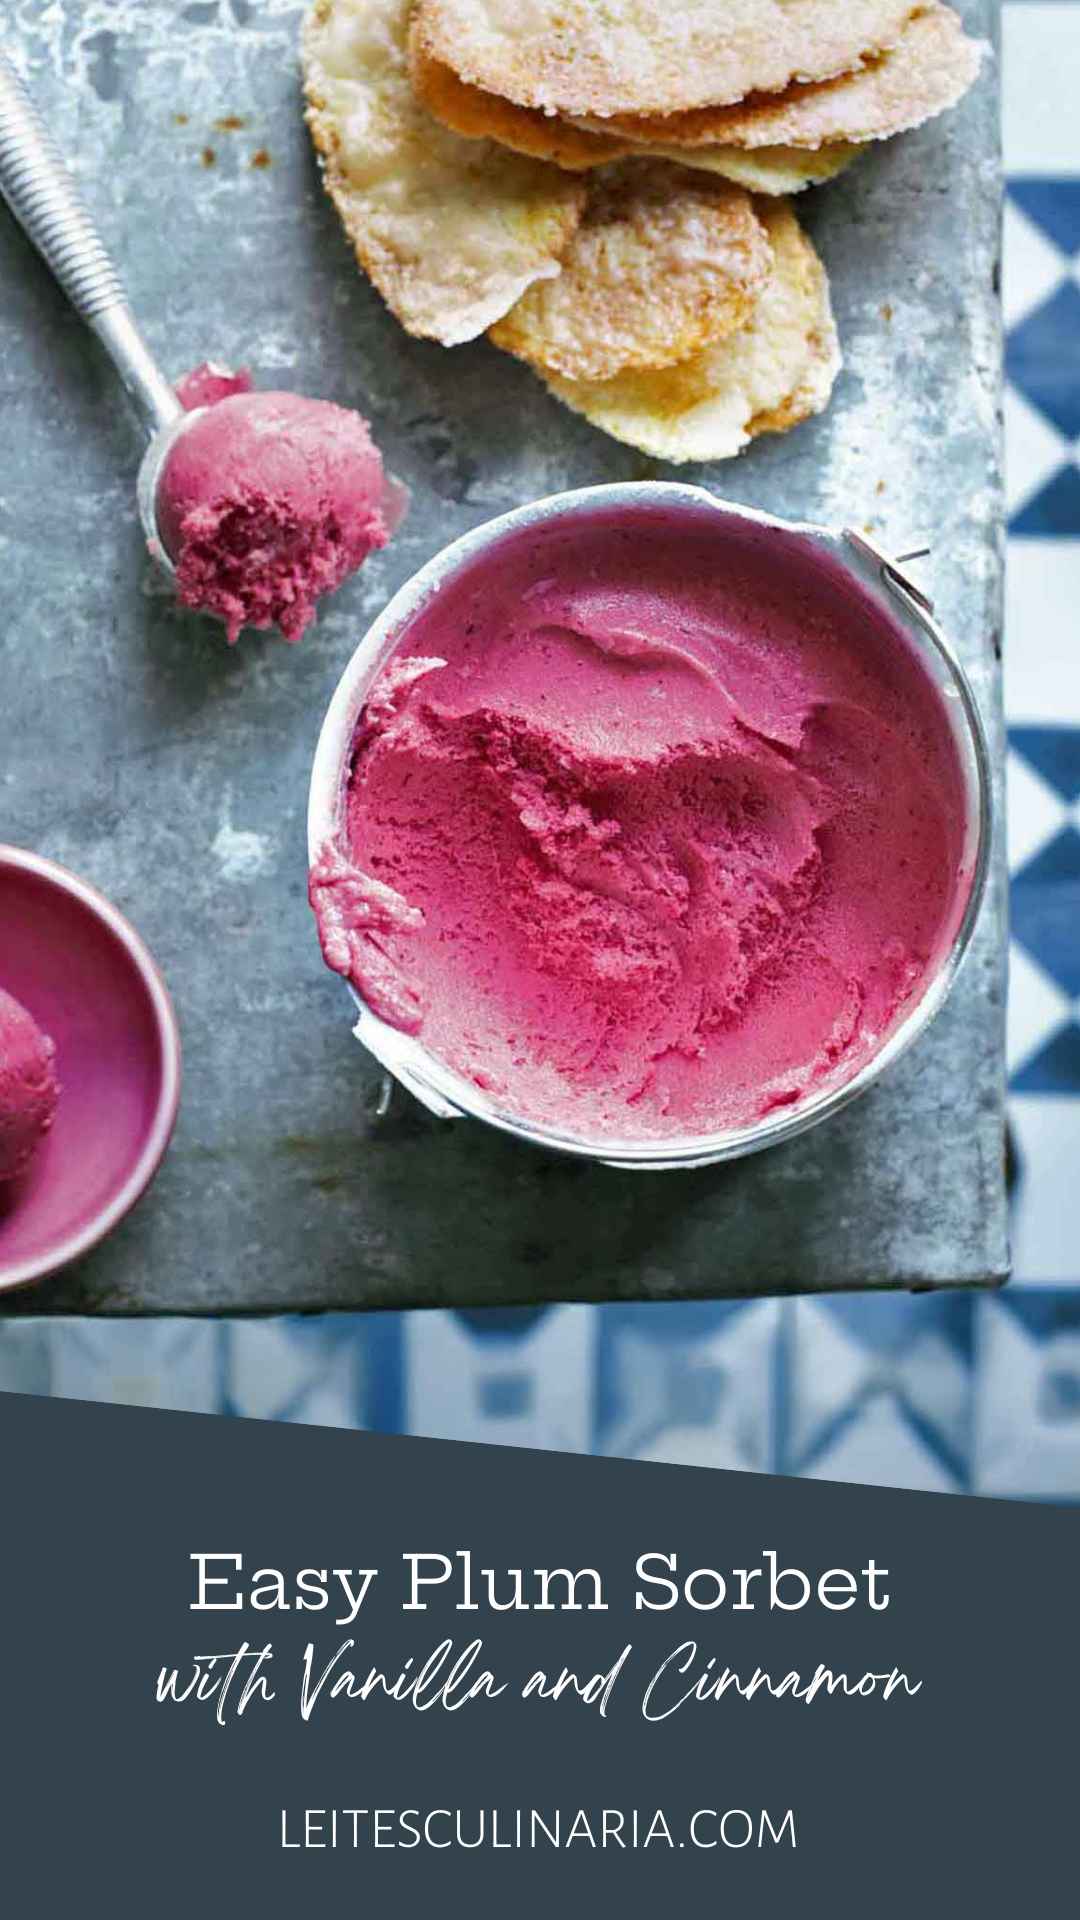 A small bucket of plum sorbet with a scoop of sorbet in a metal ice cream scoop nearby.